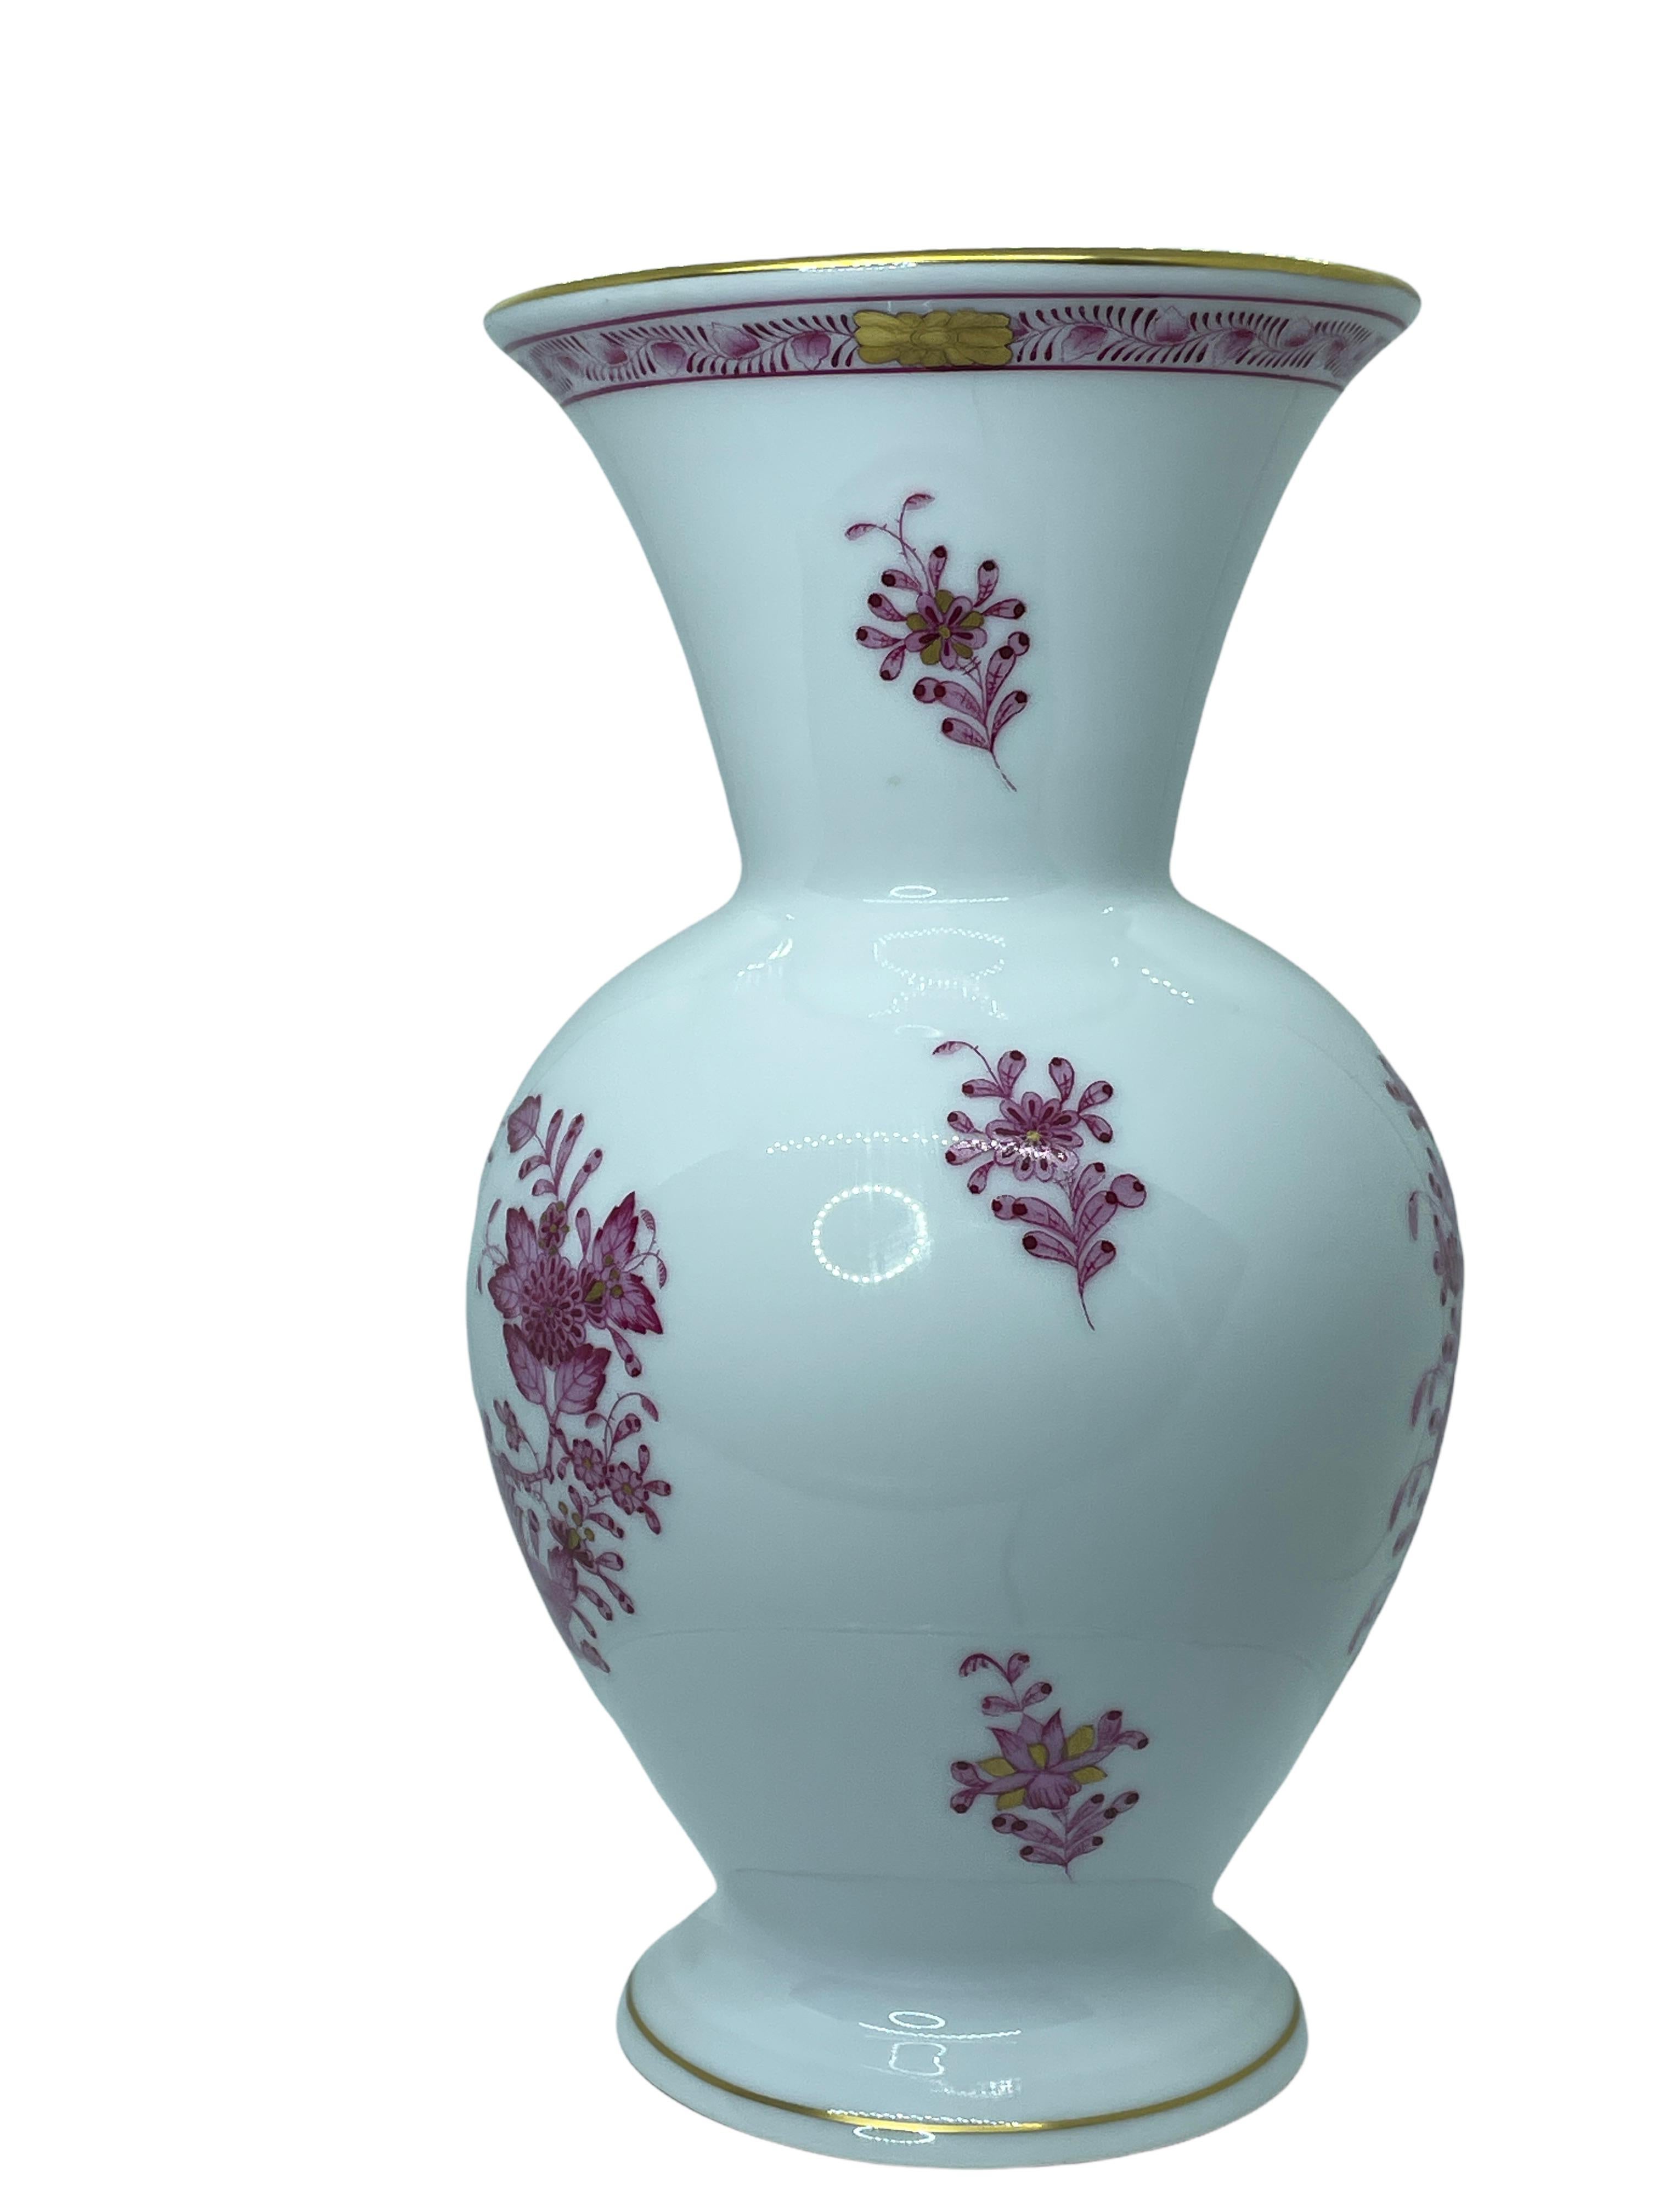 Exquisite vase in hand painted Hungarian porcelain by Herend. In 